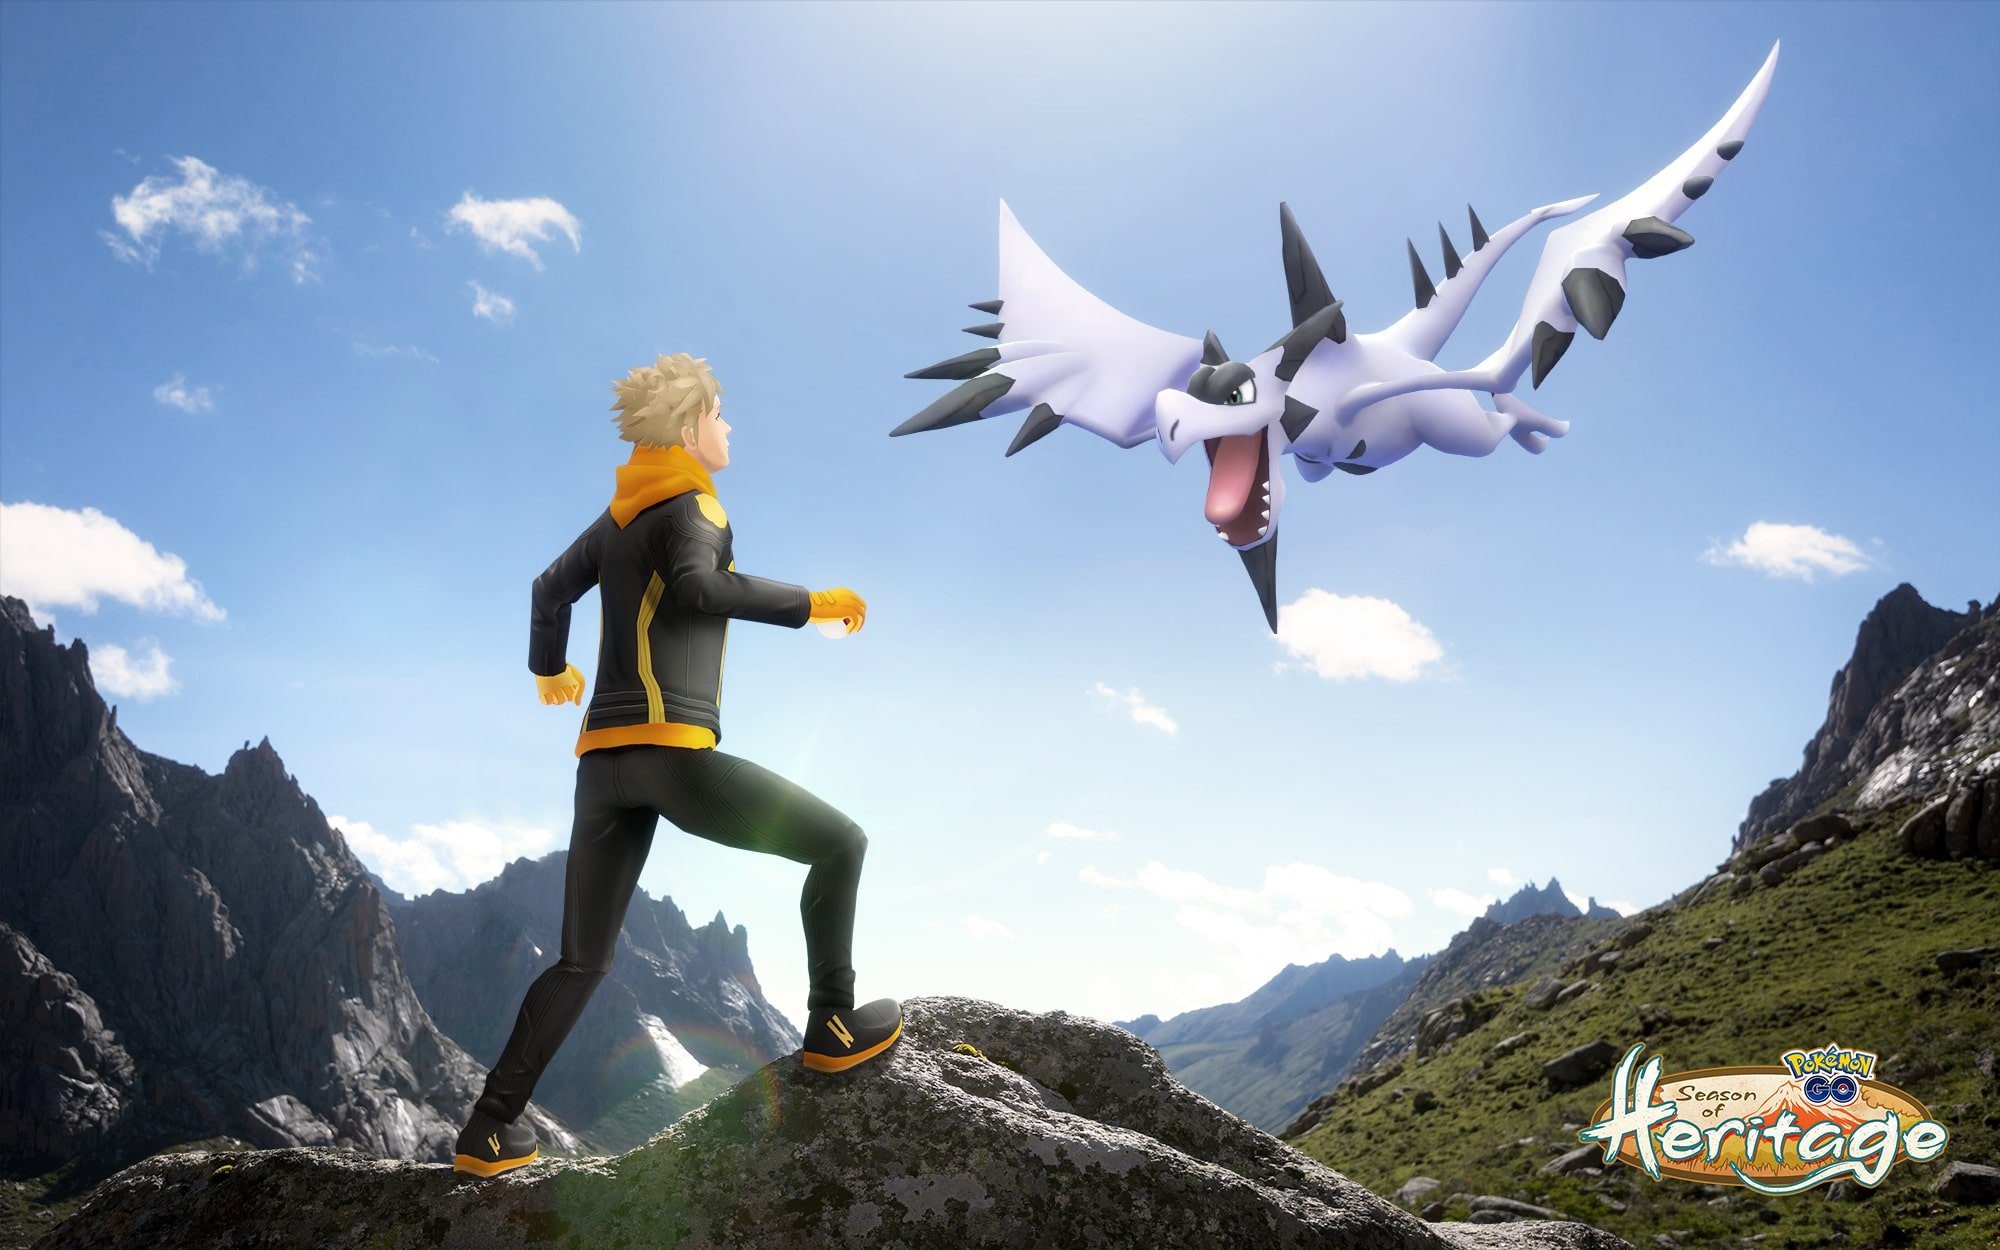 Pokemon GO Mountains of Power Release Date